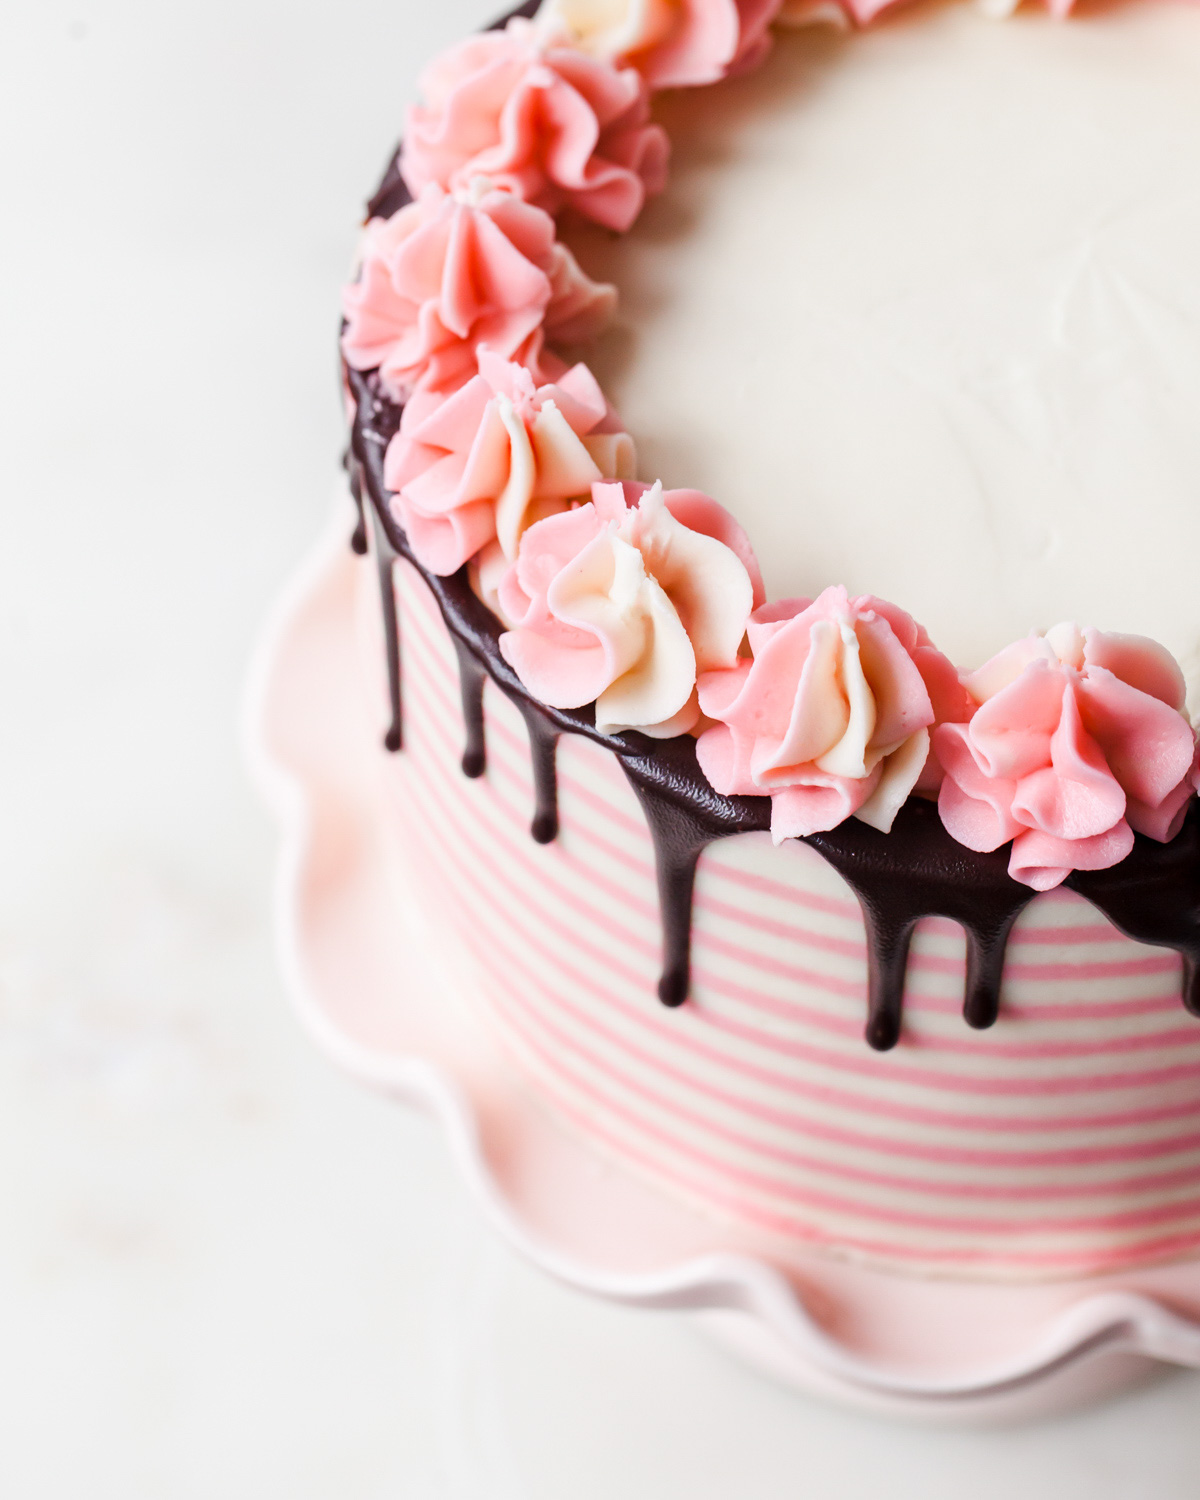 Close up of a chocolate peppermint cake with a chocolate drip